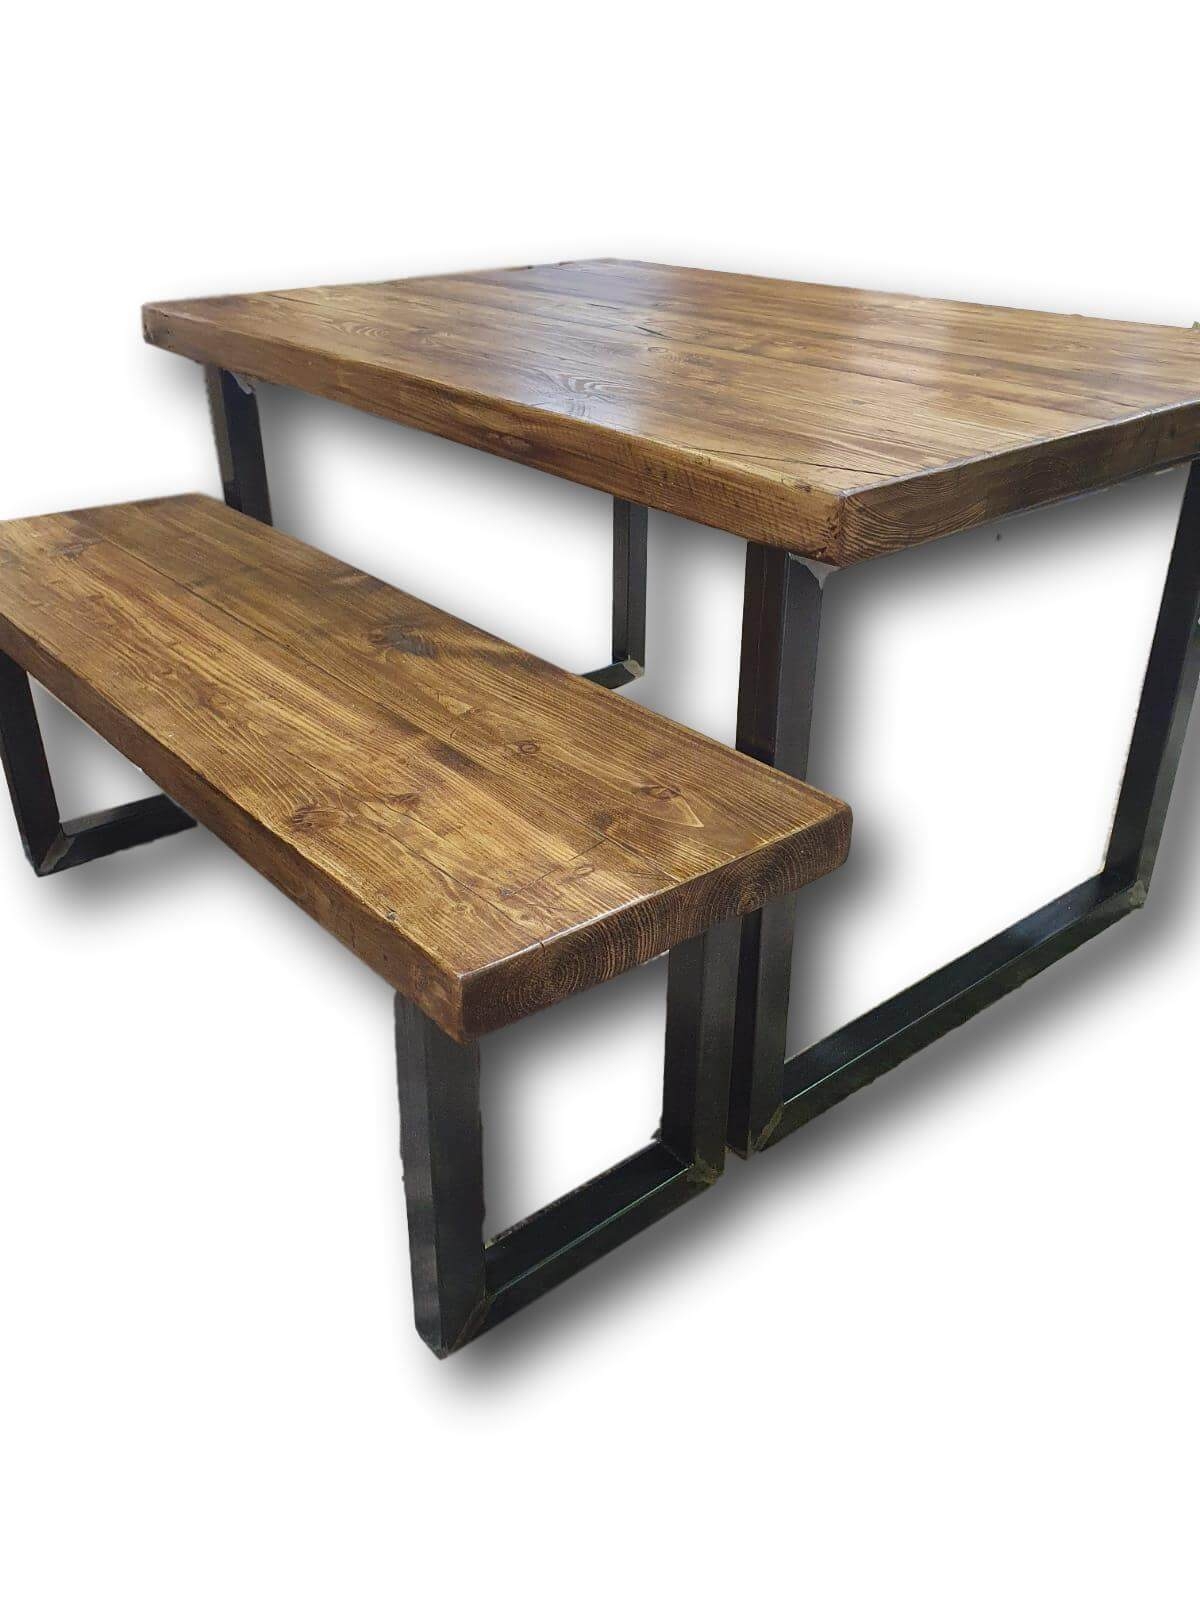 The Reclaimed Rustic Weathered Table Oil Finish – Design Your Own Dining Table 210cm x 120cm2 bench (to fit between table legs) – Acumen Collection